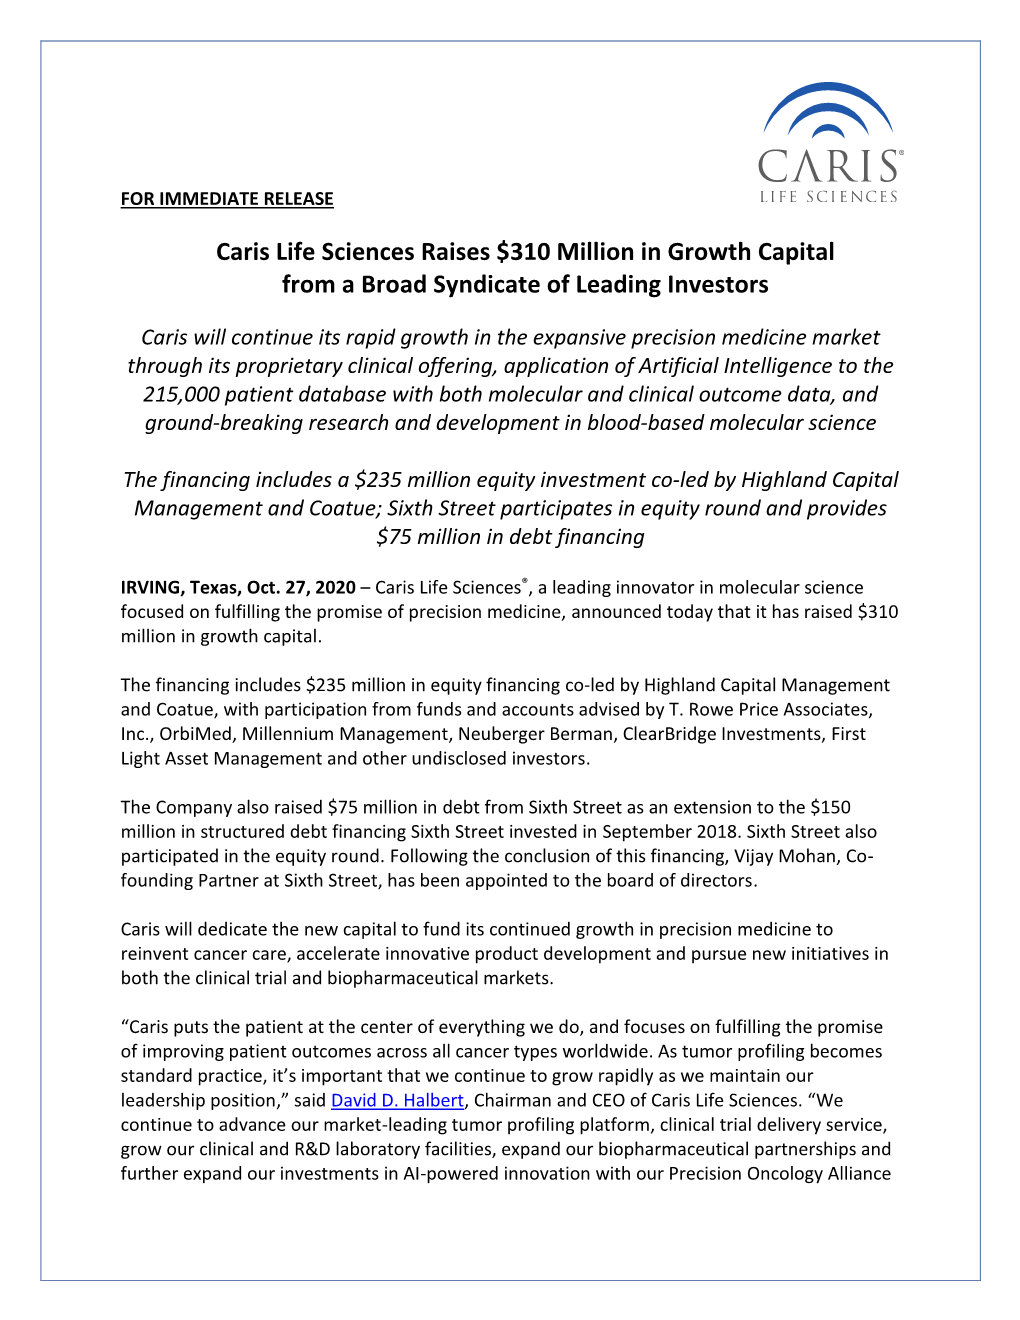 Caris Life Sciences Raises $310 Million in Growth Capital from a Broad Syndicate of Leading Investors